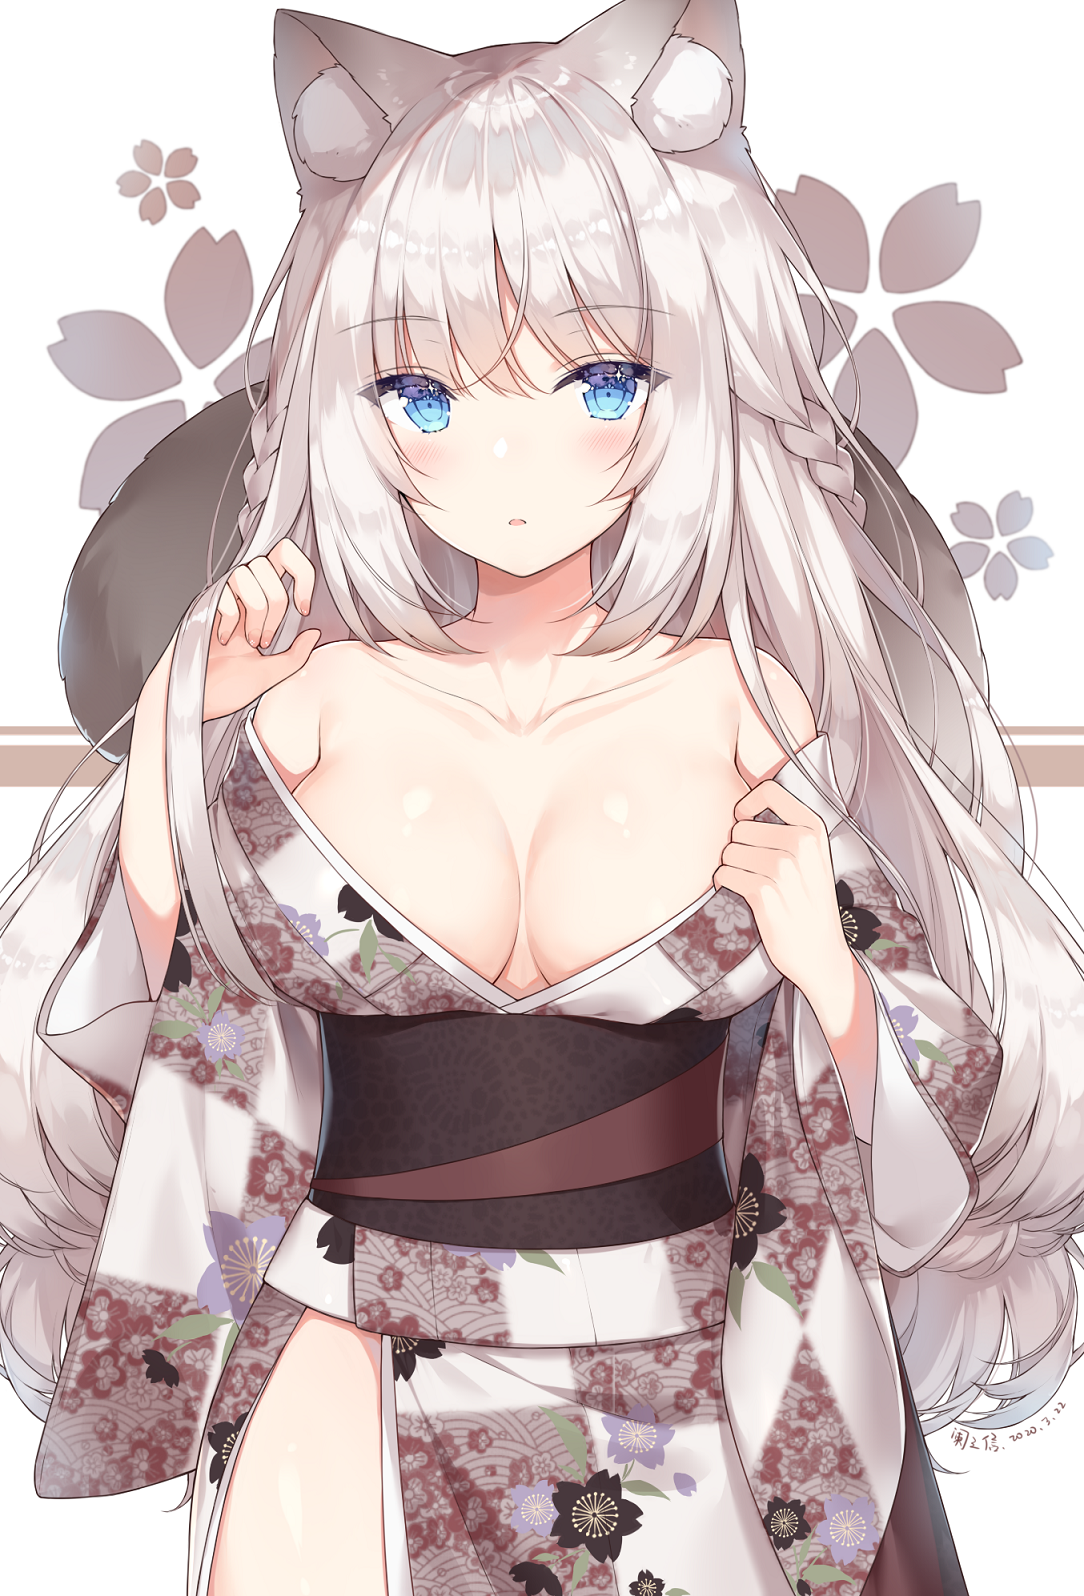 Anime 1084x1596 anime anime girls digital art artwork 2D portrait display frontal view Ayuanlv animal ears tail silver hair long hair blue eyes blushing Japanese clothes bare shoulders cleavage